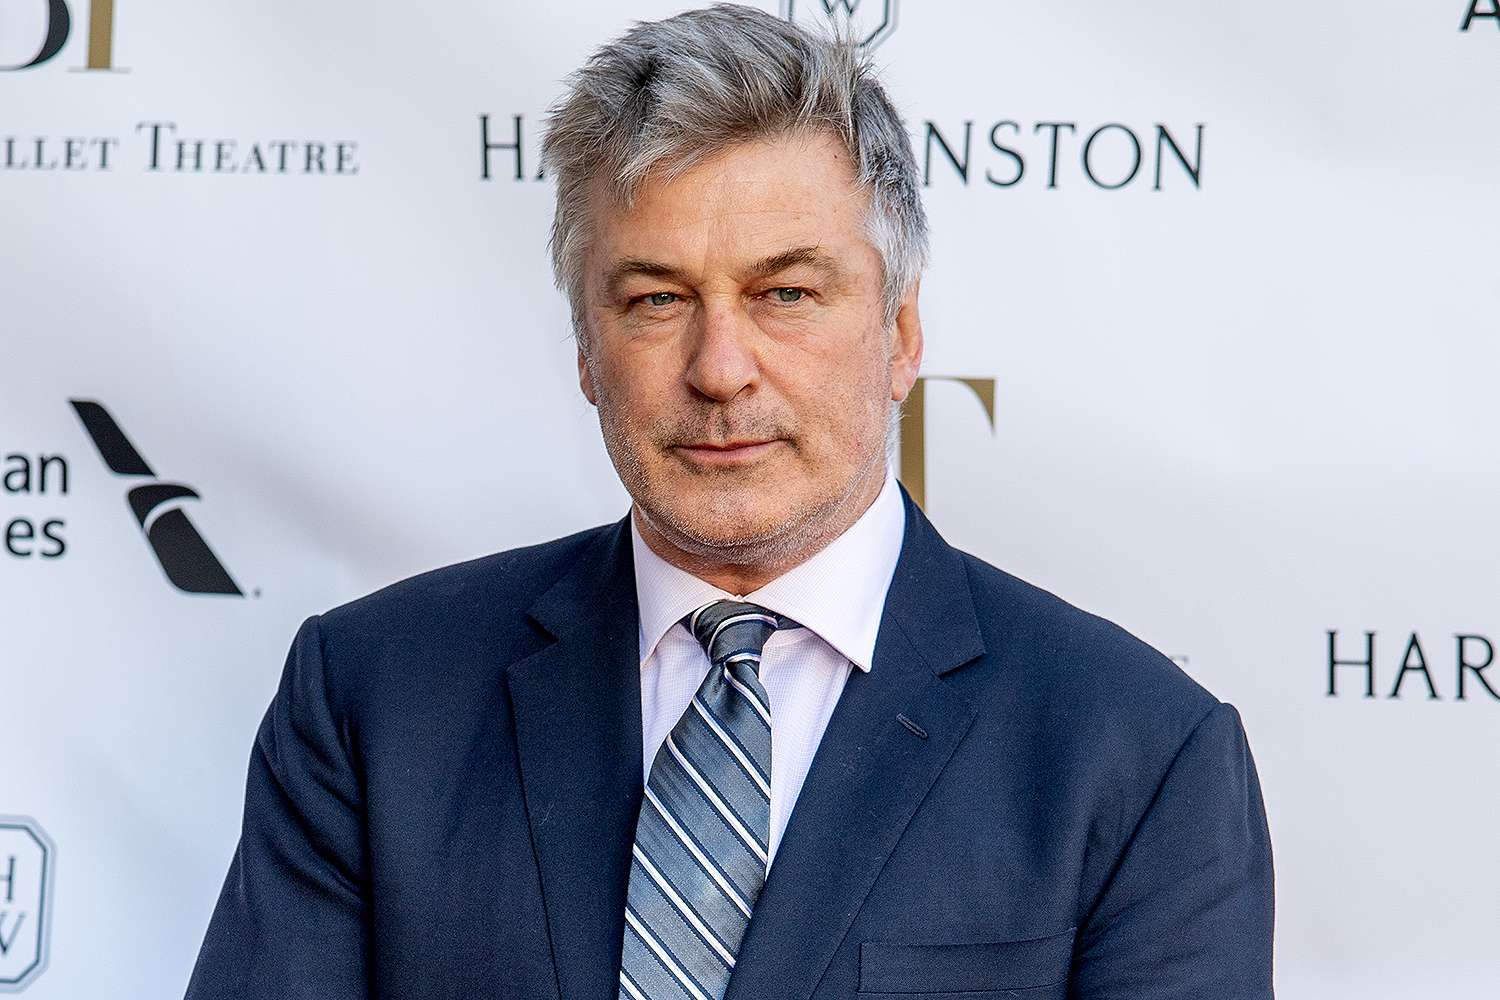 Alec Baldwin on Dealing with Years of Lyme Disease Pain: 'This Thing Just Attacks Me' - Yahoo Entertainment